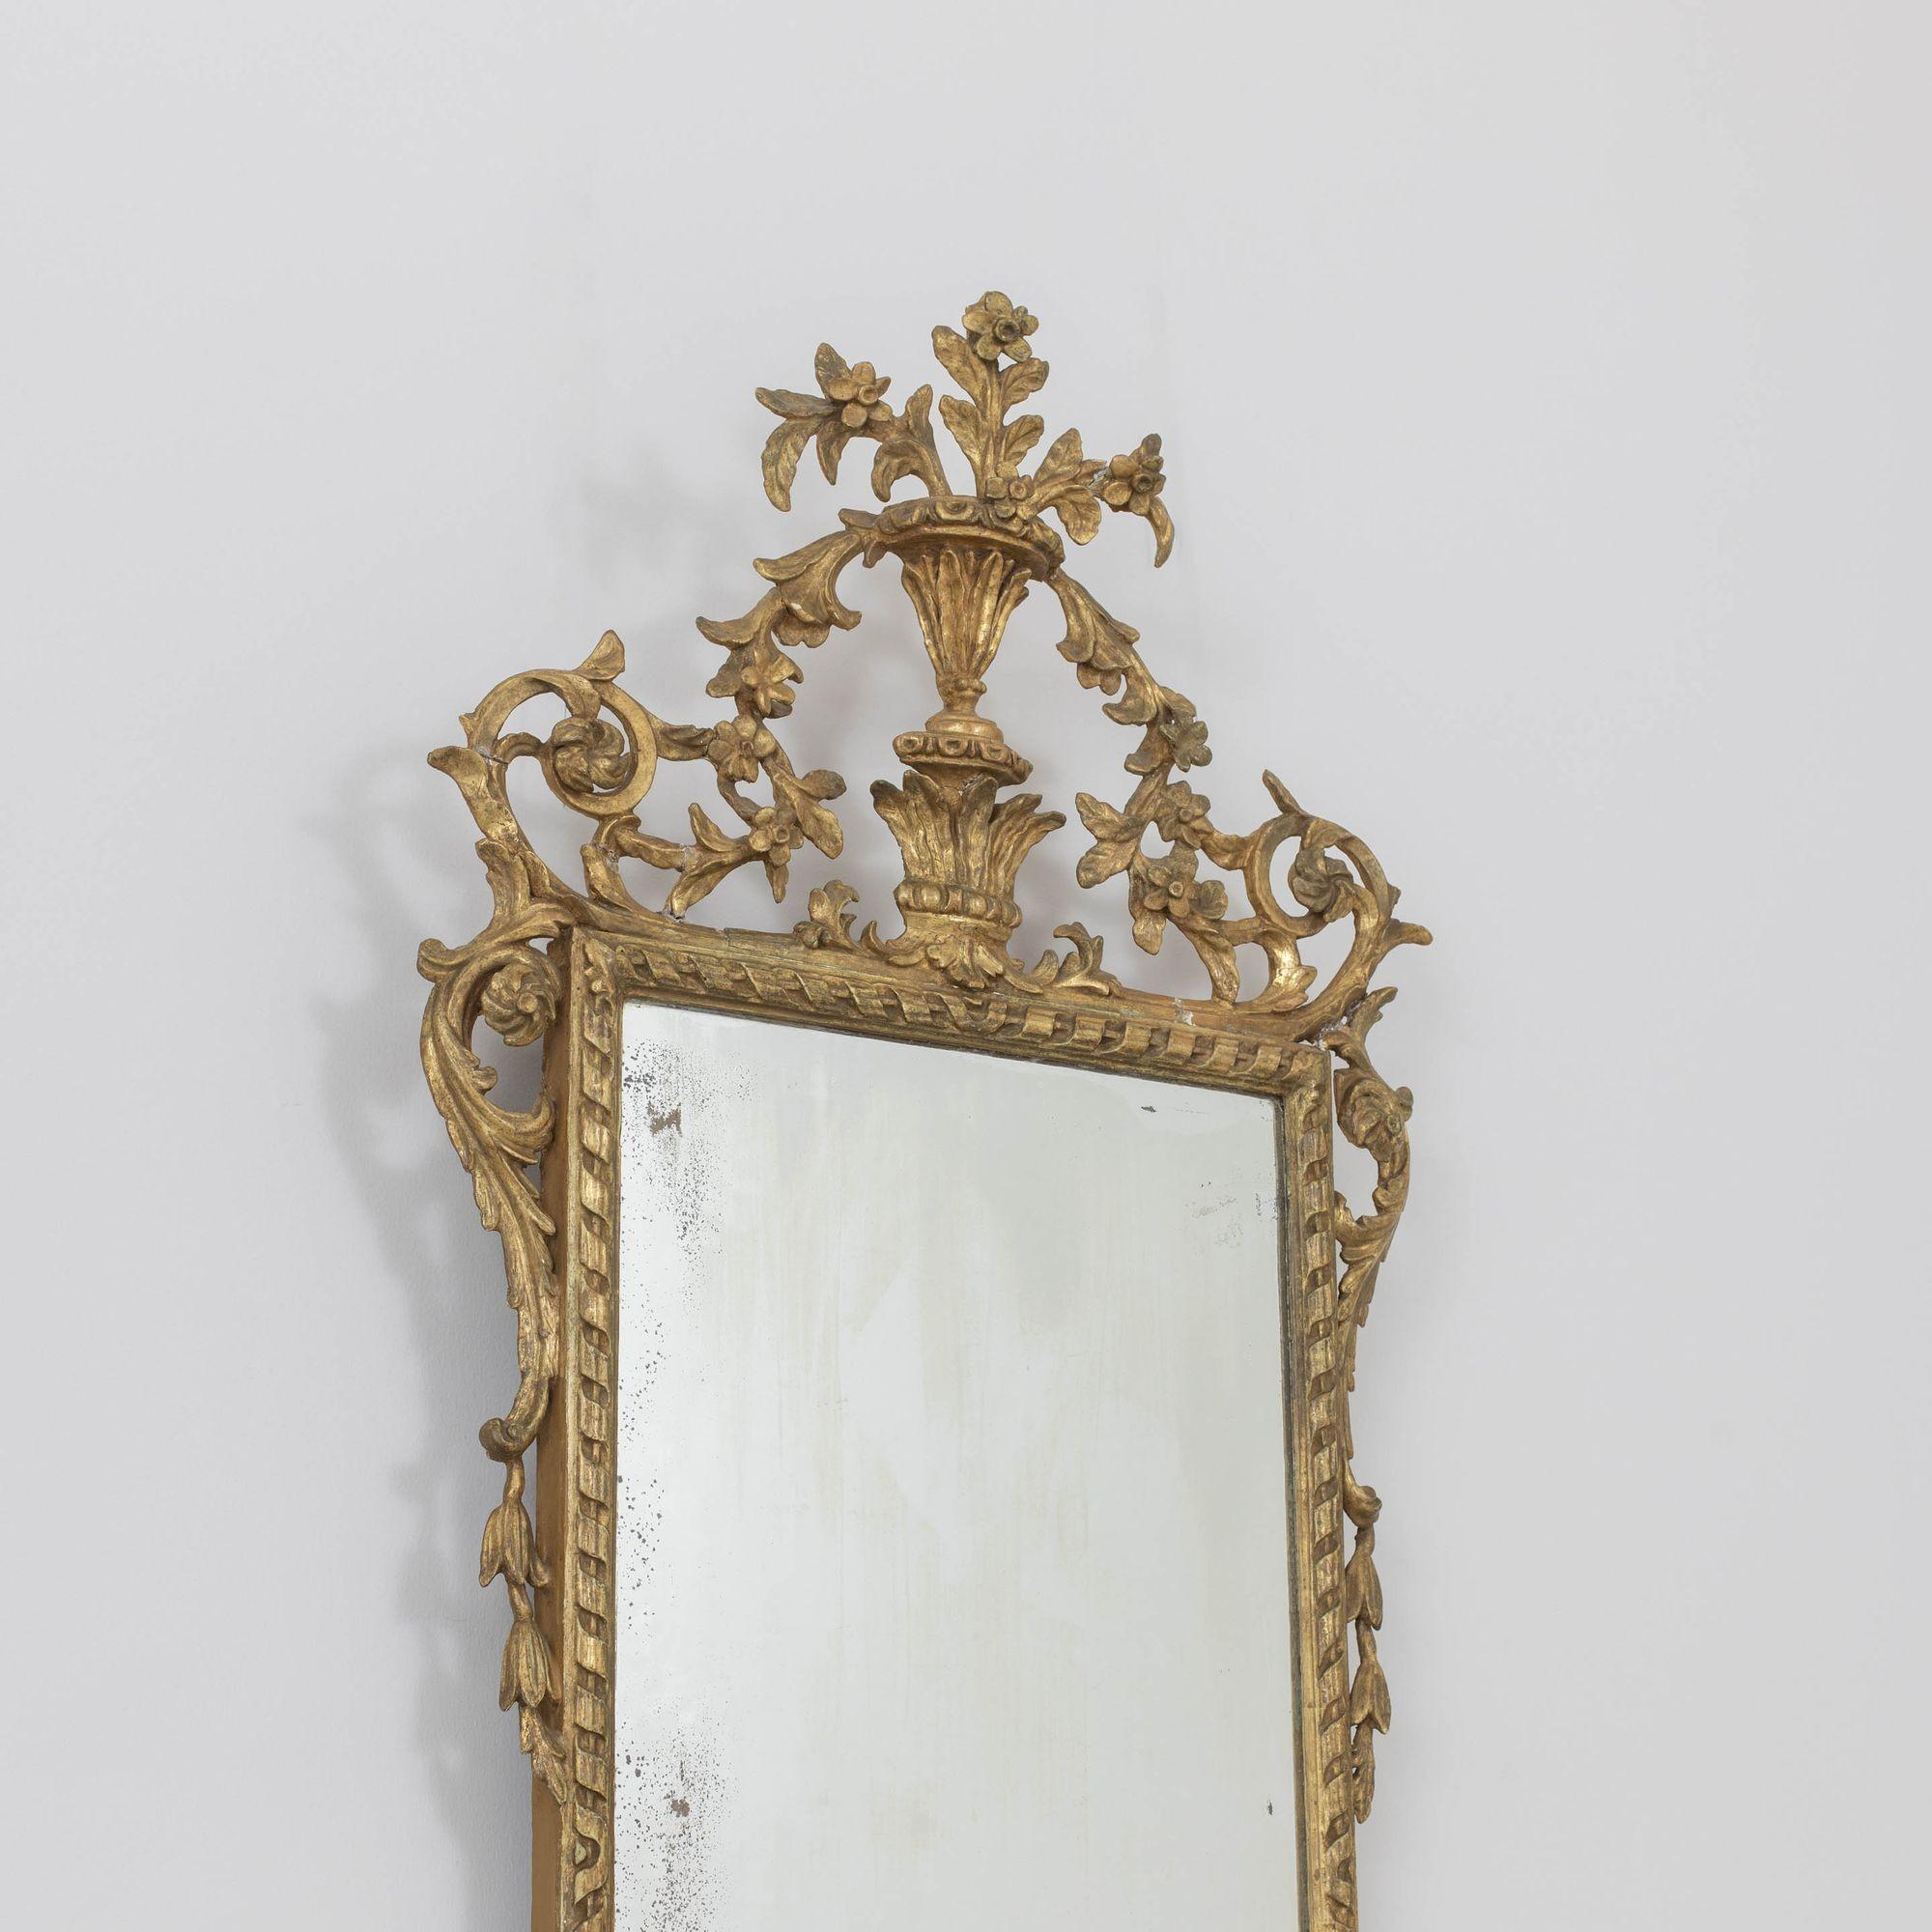 19th c. Italian Giltwood Mirror with Original Mirror Plate In Excellent Condition For Sale In Wichita, KS